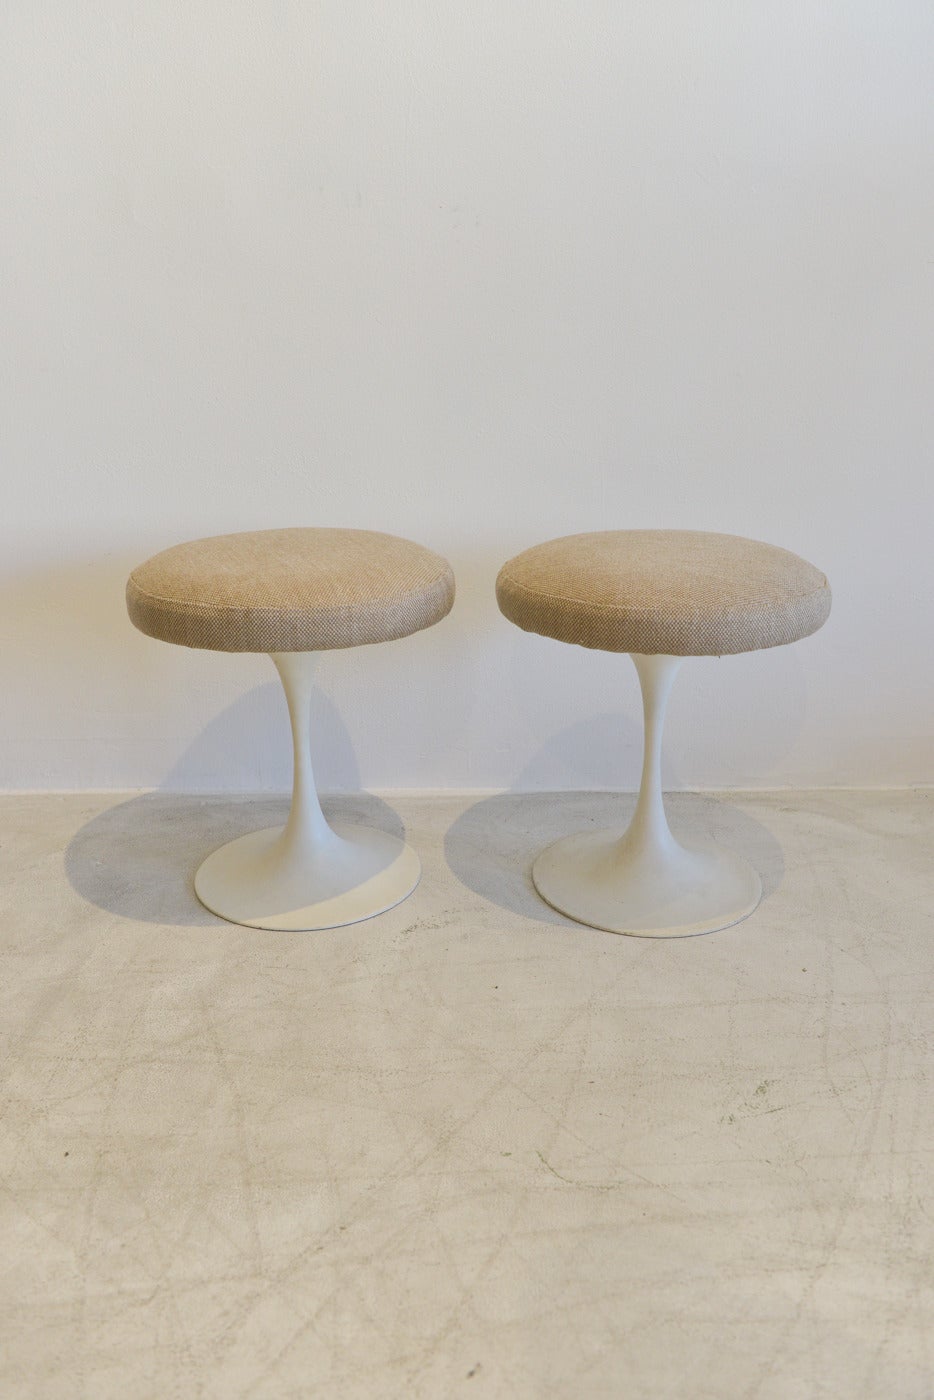 Beautiful pair of Eero Saarinen style tulip base stools made by Burke in the 50's.  Early Arkana base, stamped on underside and fully restored with new foam and neutral beige upholstery.  Easy to match almost anything in your home, these beautiful